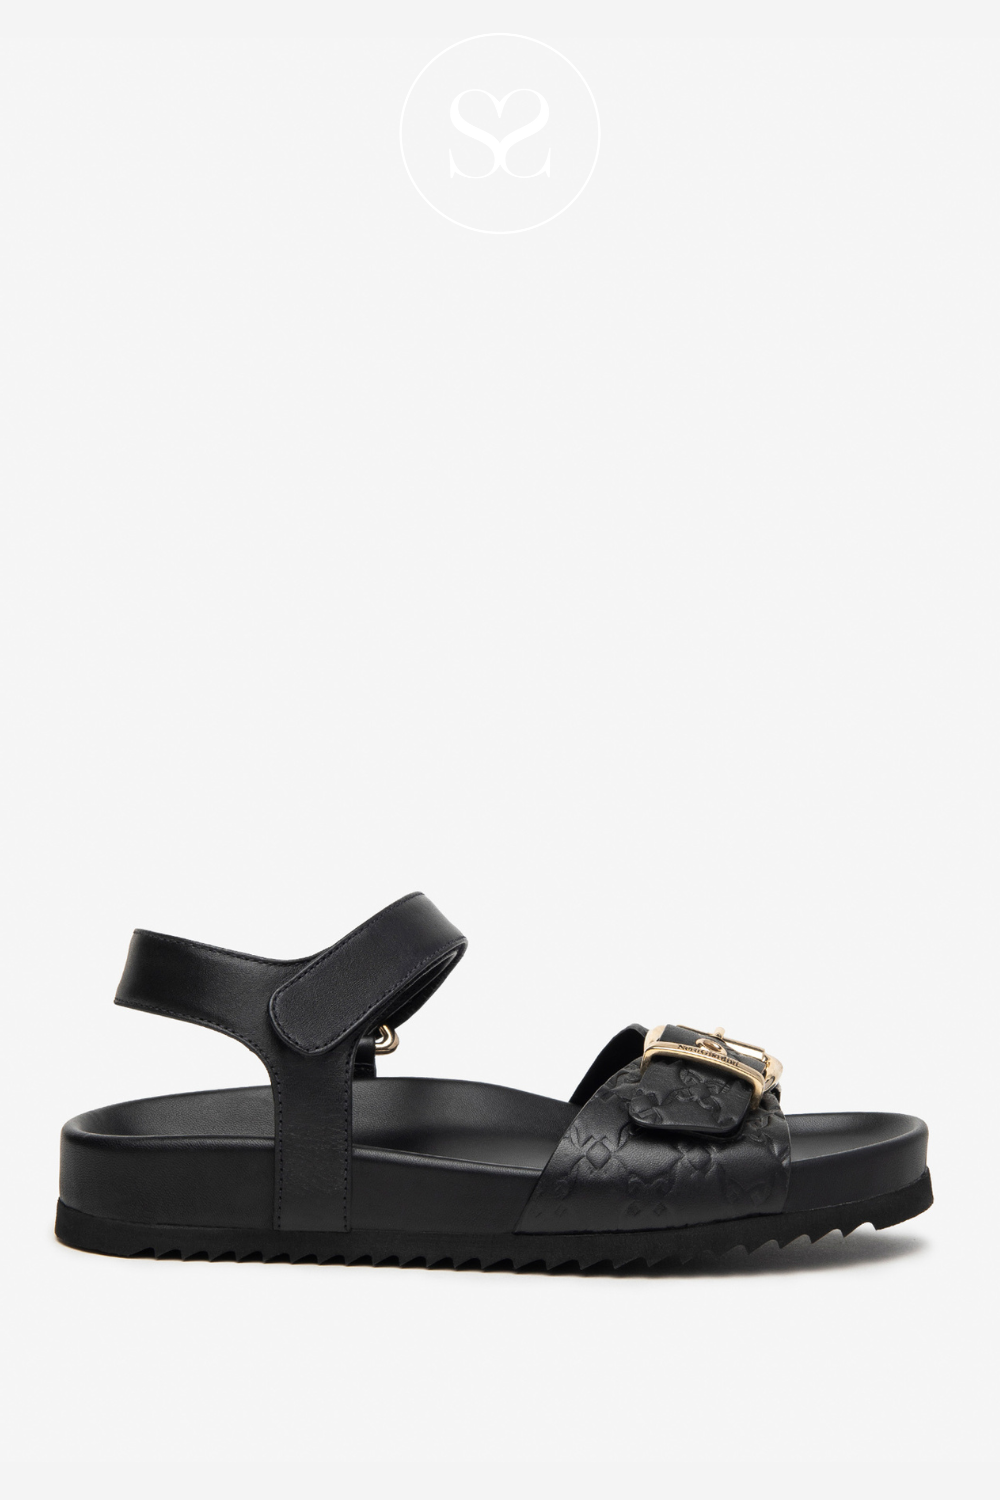 CHUNKY BLACK LEATHER SANDALS FROM NERO GIARDINI